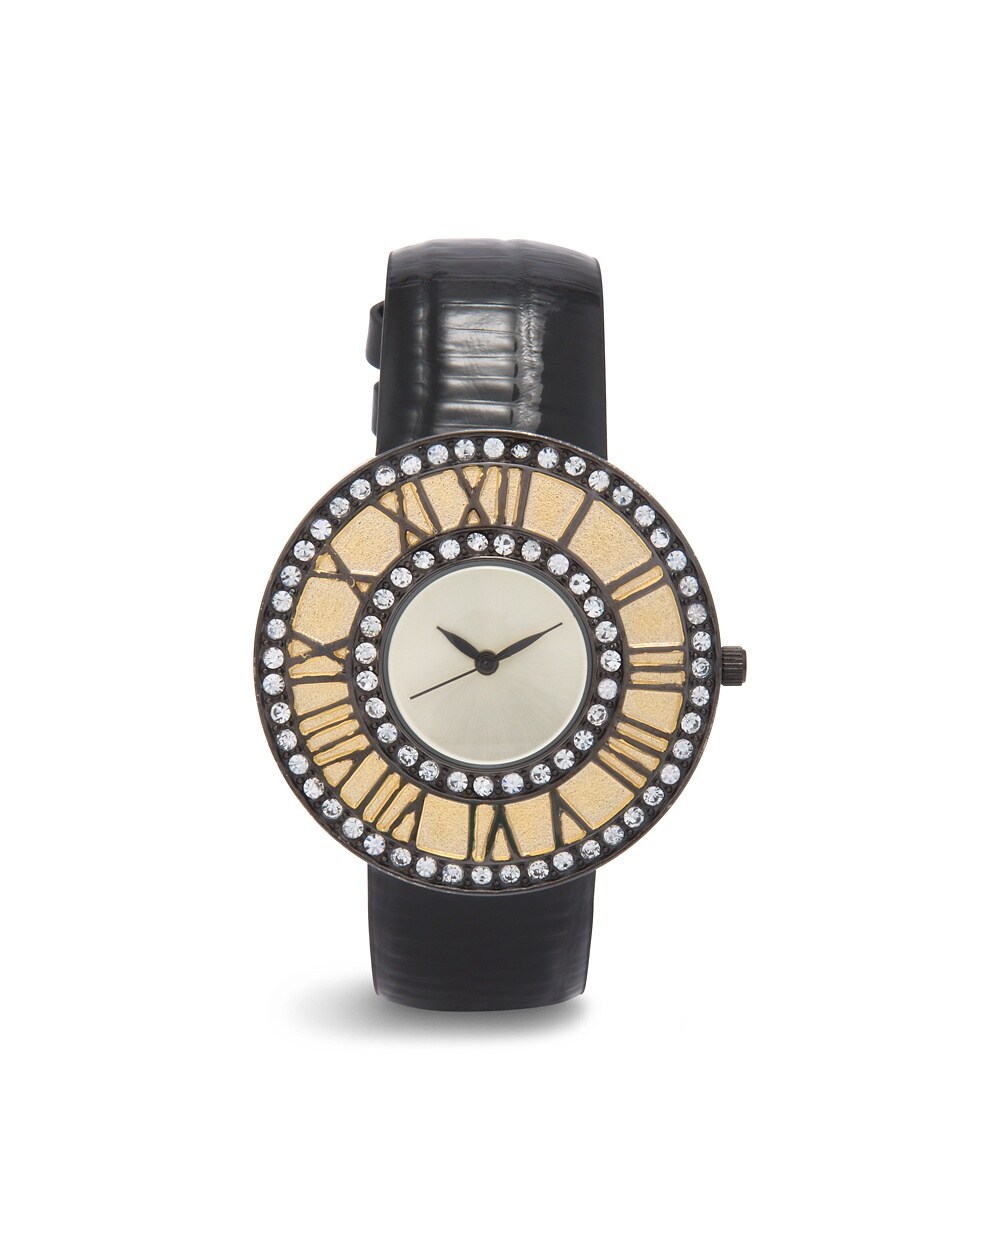 Jacqueline Black-and-Gold Tone Watch